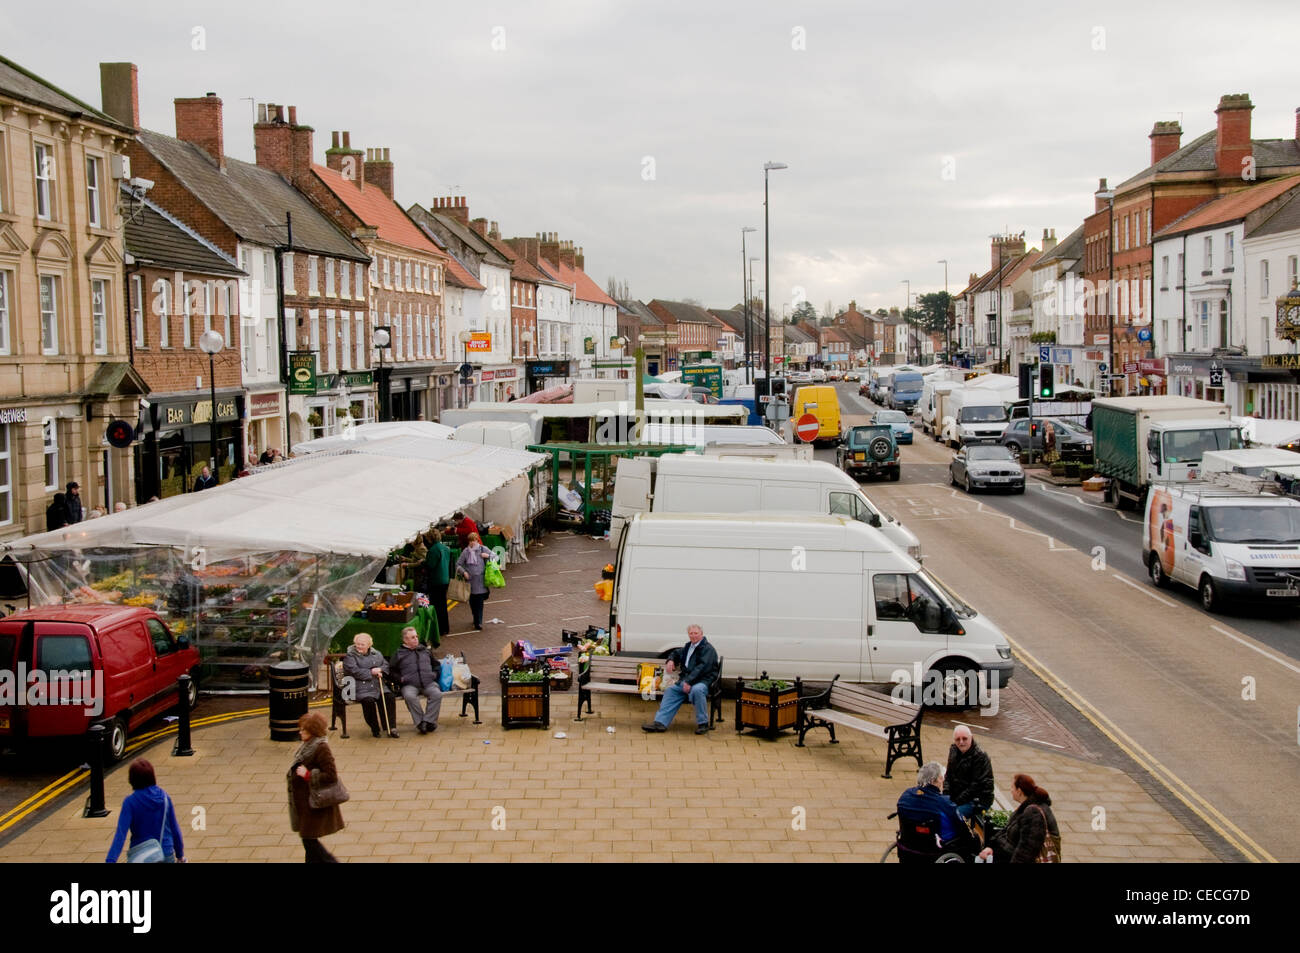 Busy bustling scenic town (Northallerton High Street) on market day (stalls, people shopping, vehicles on road, shops) - North Yorkshire, England, UK. Stock Photo